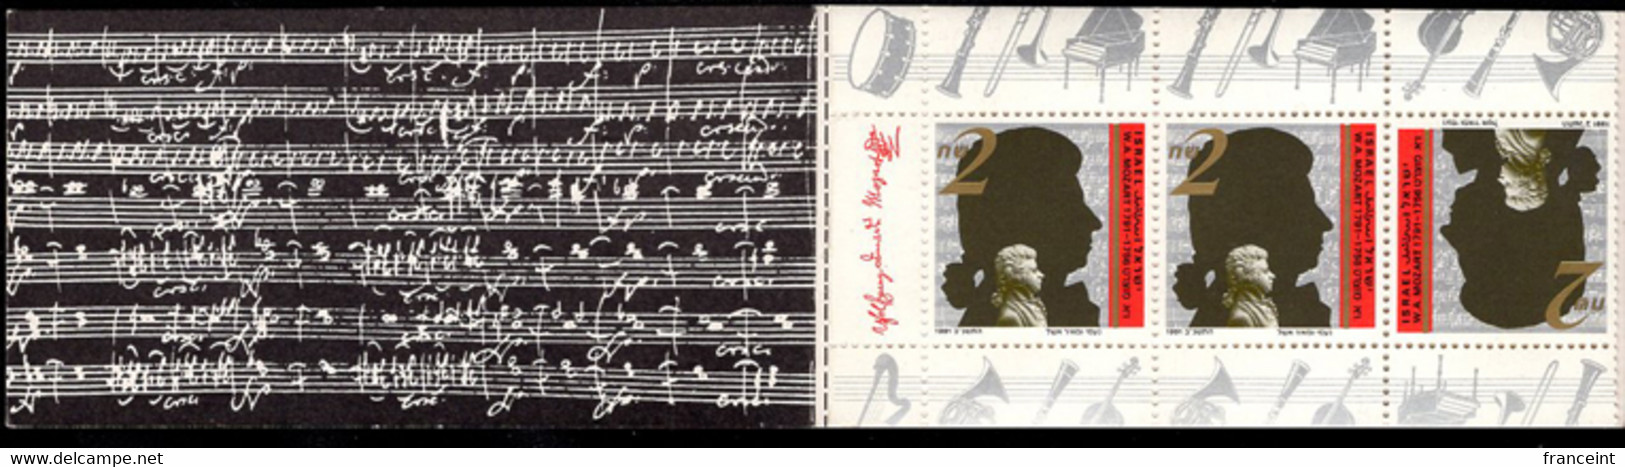 ISRAEL(1991) Mozart. Booklet Of 4 Stamps With Score From Don Giovanni On Inside Cover. - Cuadernillos